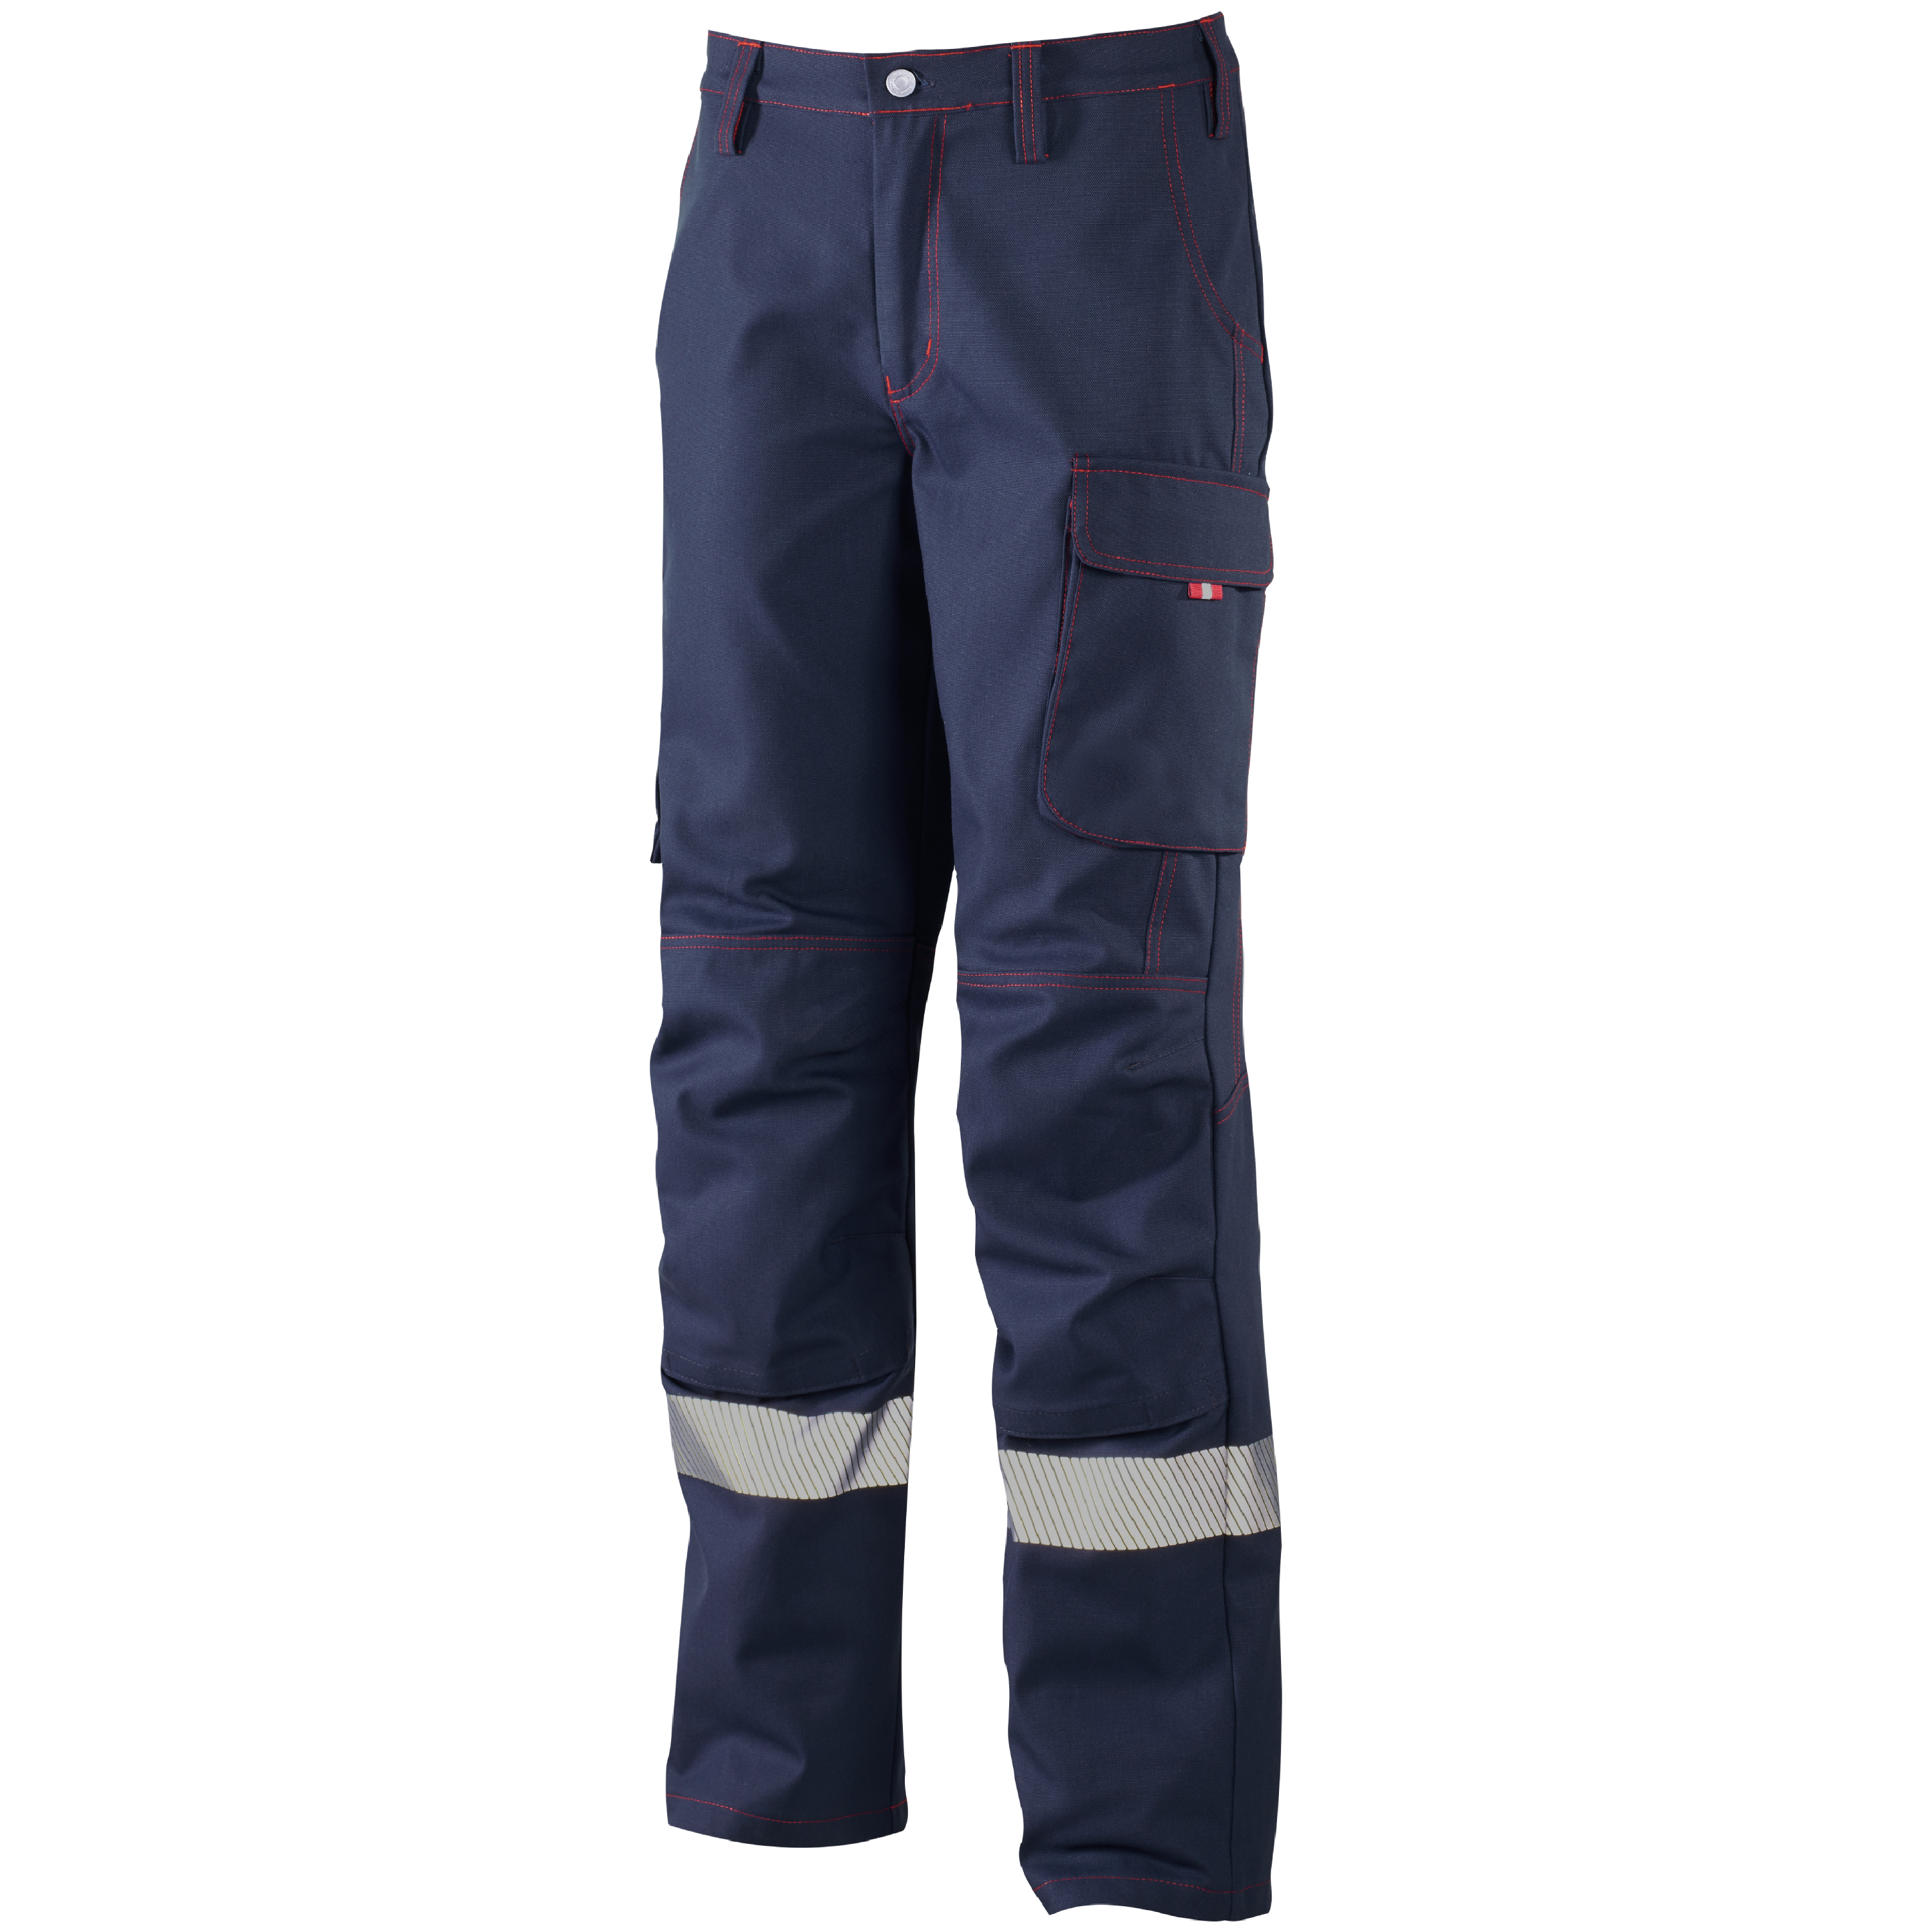 CWS Metaller Trousers DarkBlue/Red w/ Reflective Band w/ Kneepad Pockets